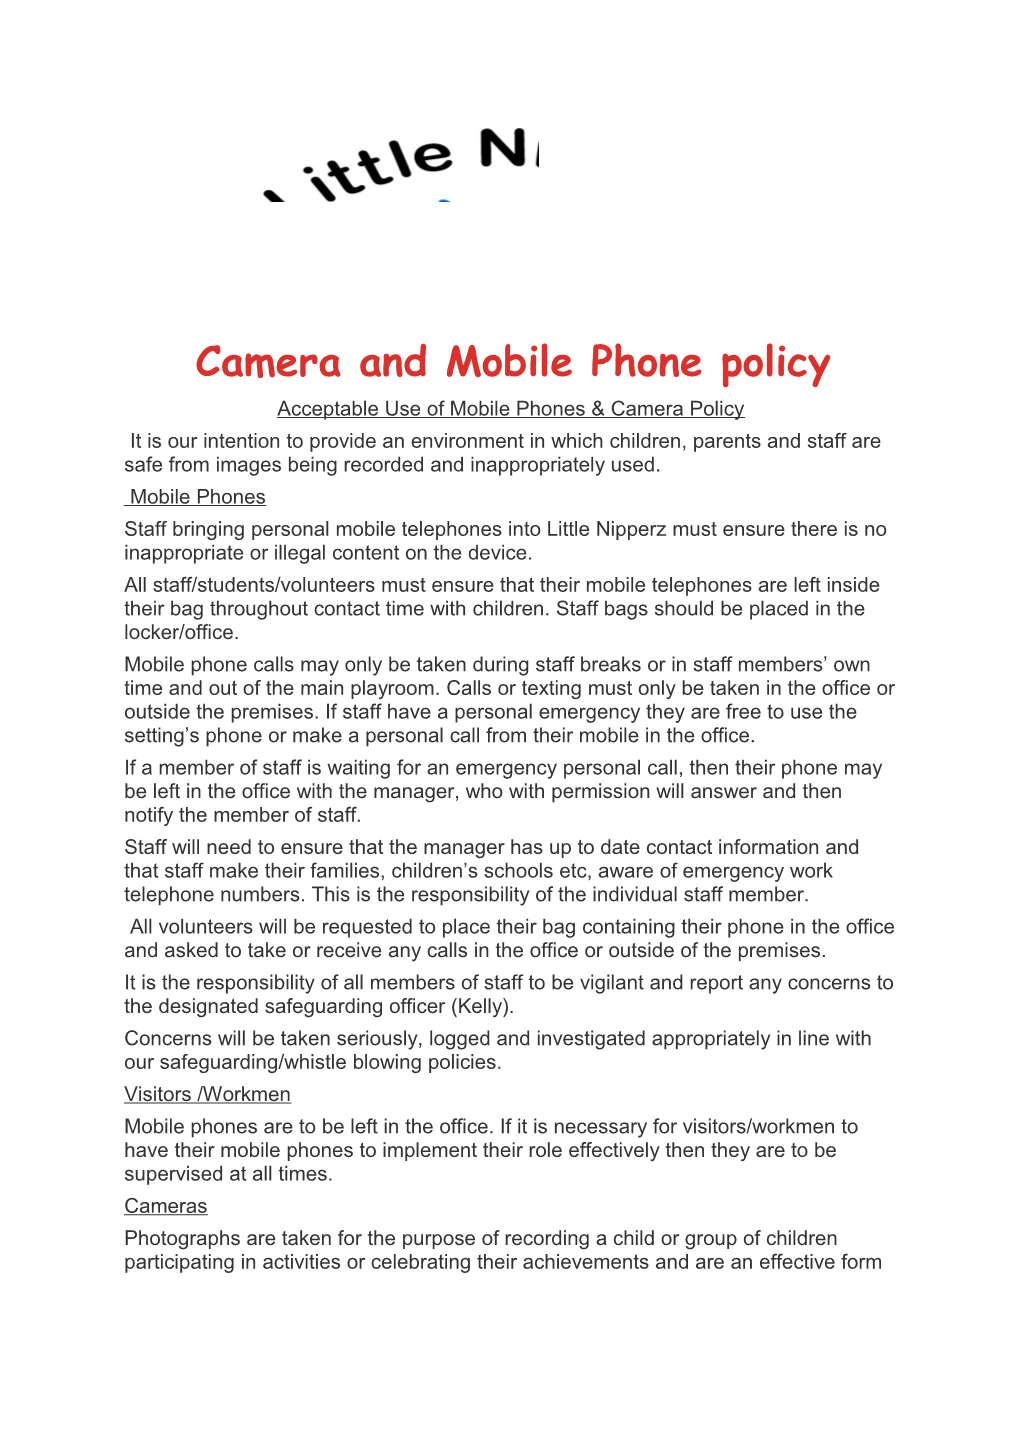 Camera and Mobile Phone Policy